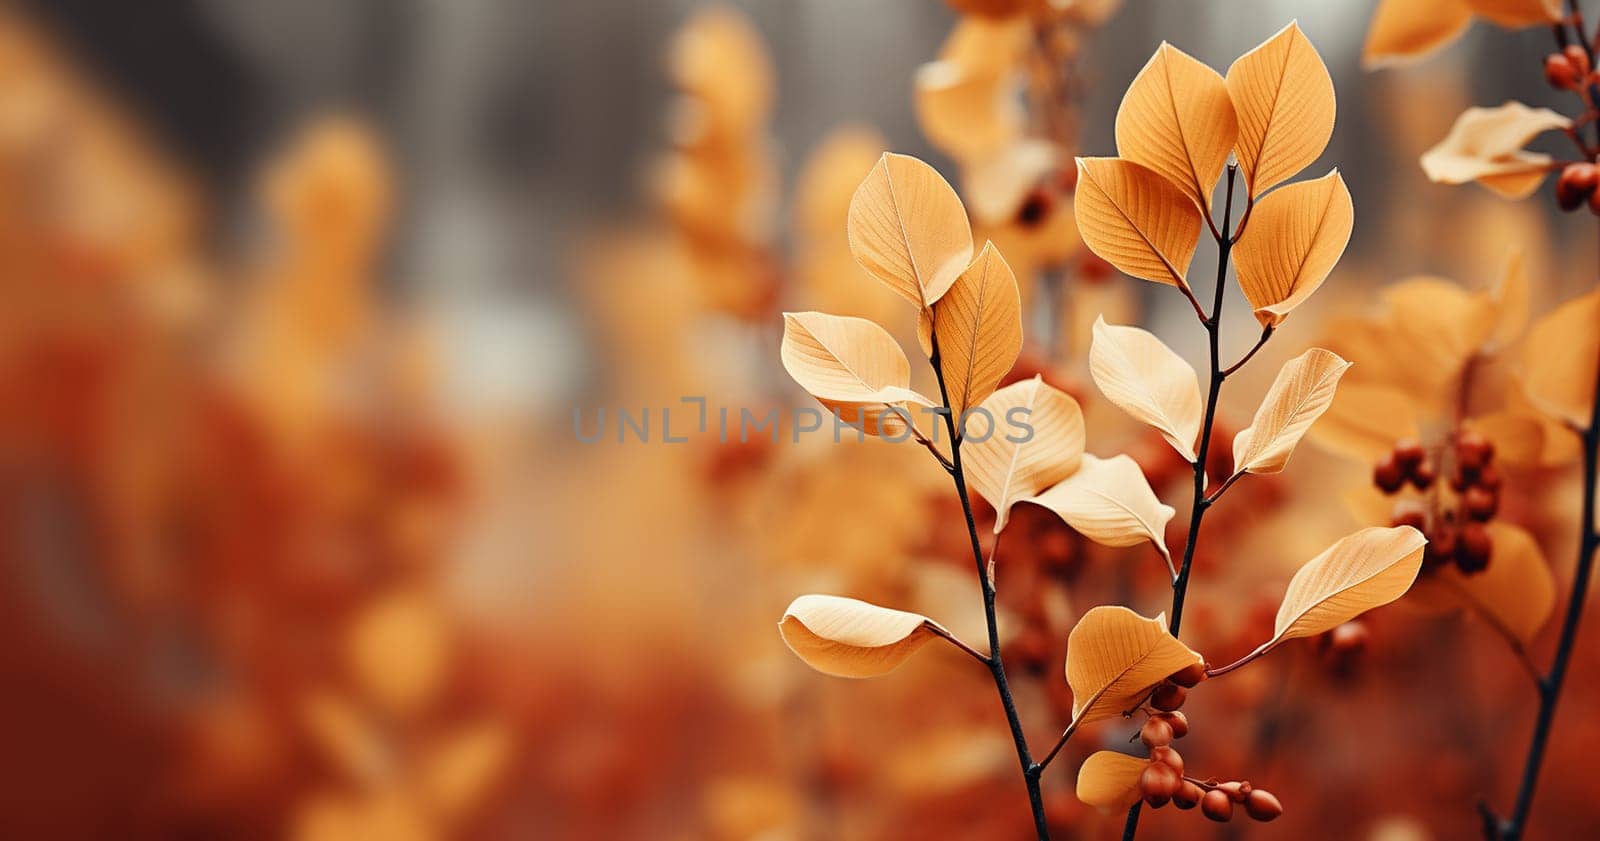 Colorful autumn plants background, brown,yellow orange fall colored with blurred background. Trees Leaves in vintage color with copy space by Annebel146